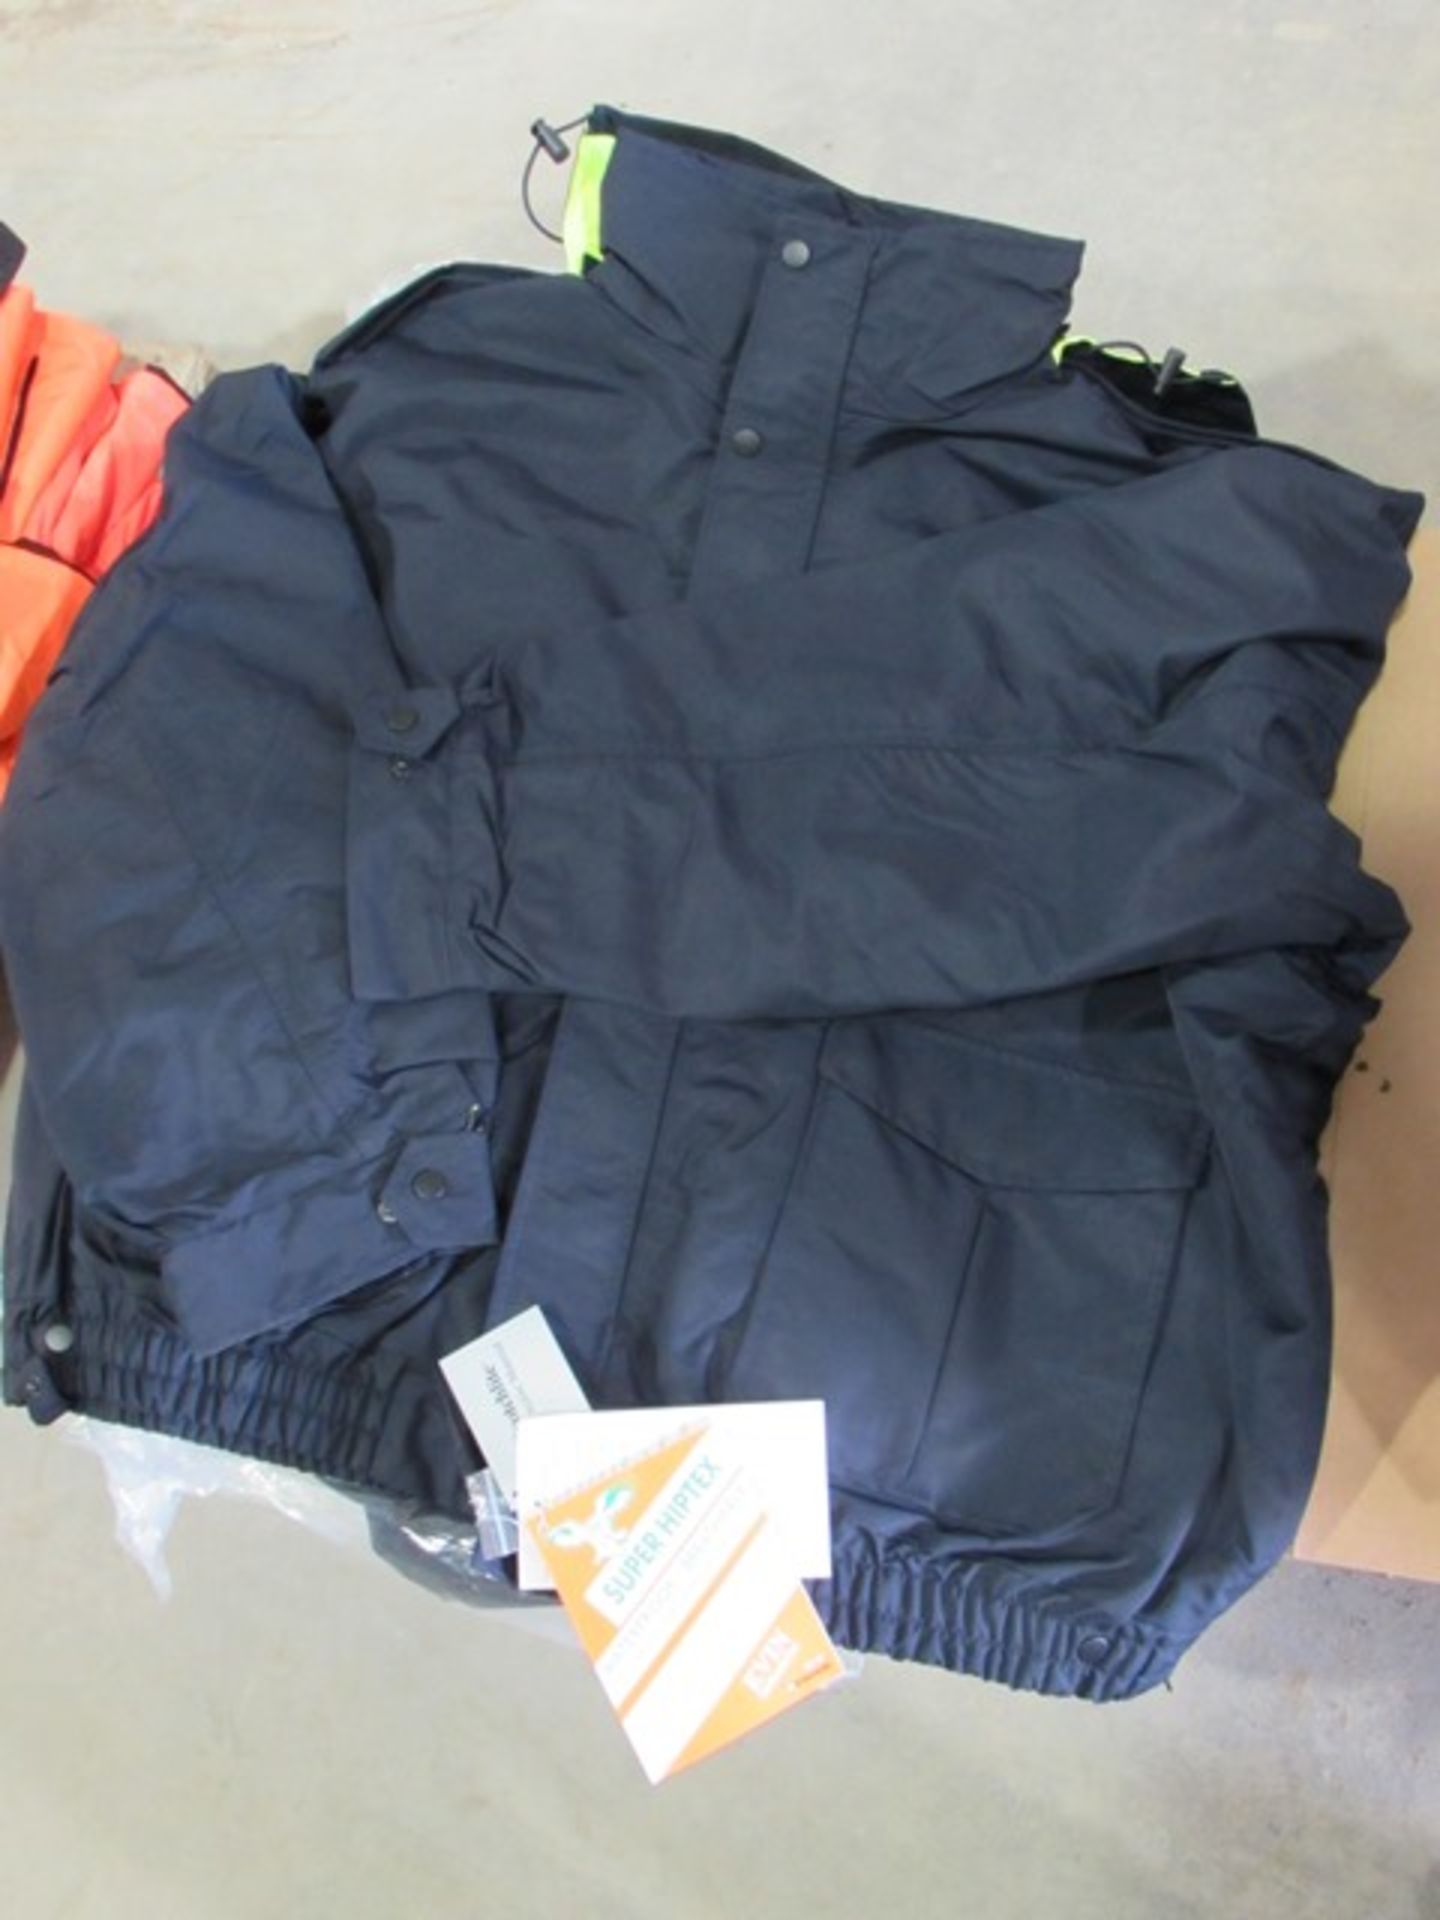 Lot brand new reversible work jackets c/w hi-vis inner, thinsulate, 3M reflective striping (approx